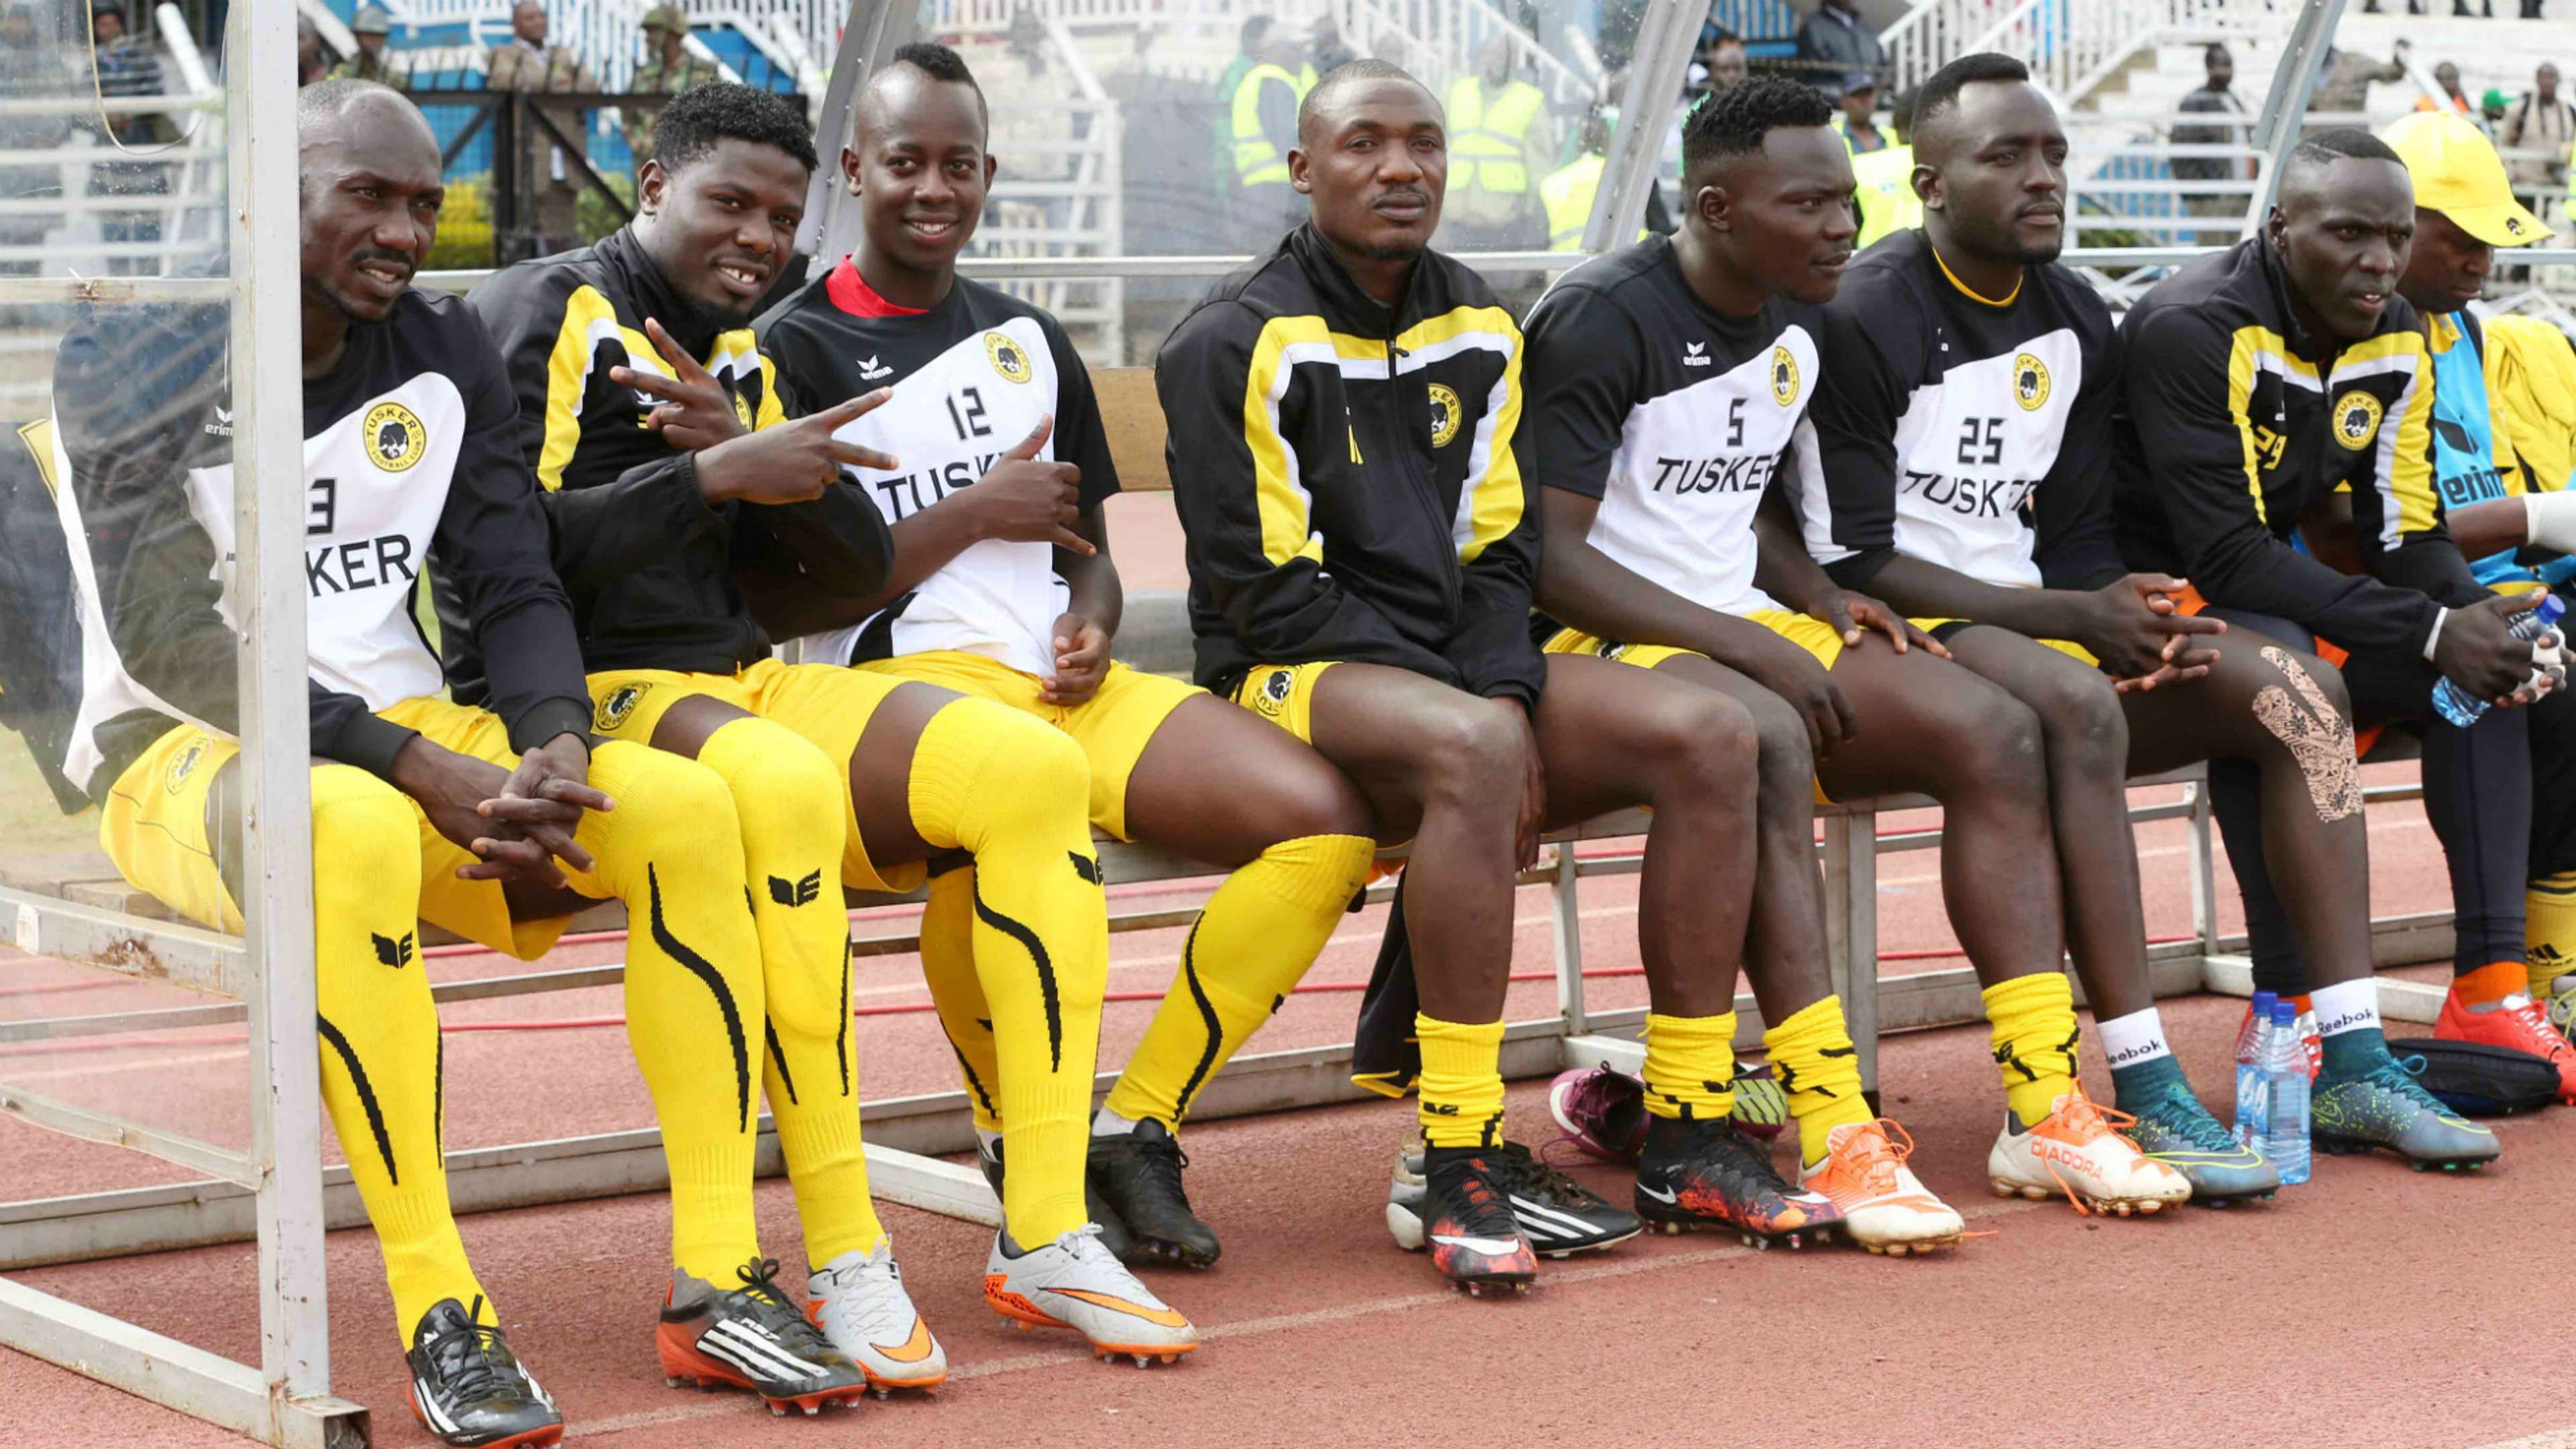 Top striker Allan Wanga and goalkeeper David Okello were among those benched by Tusker